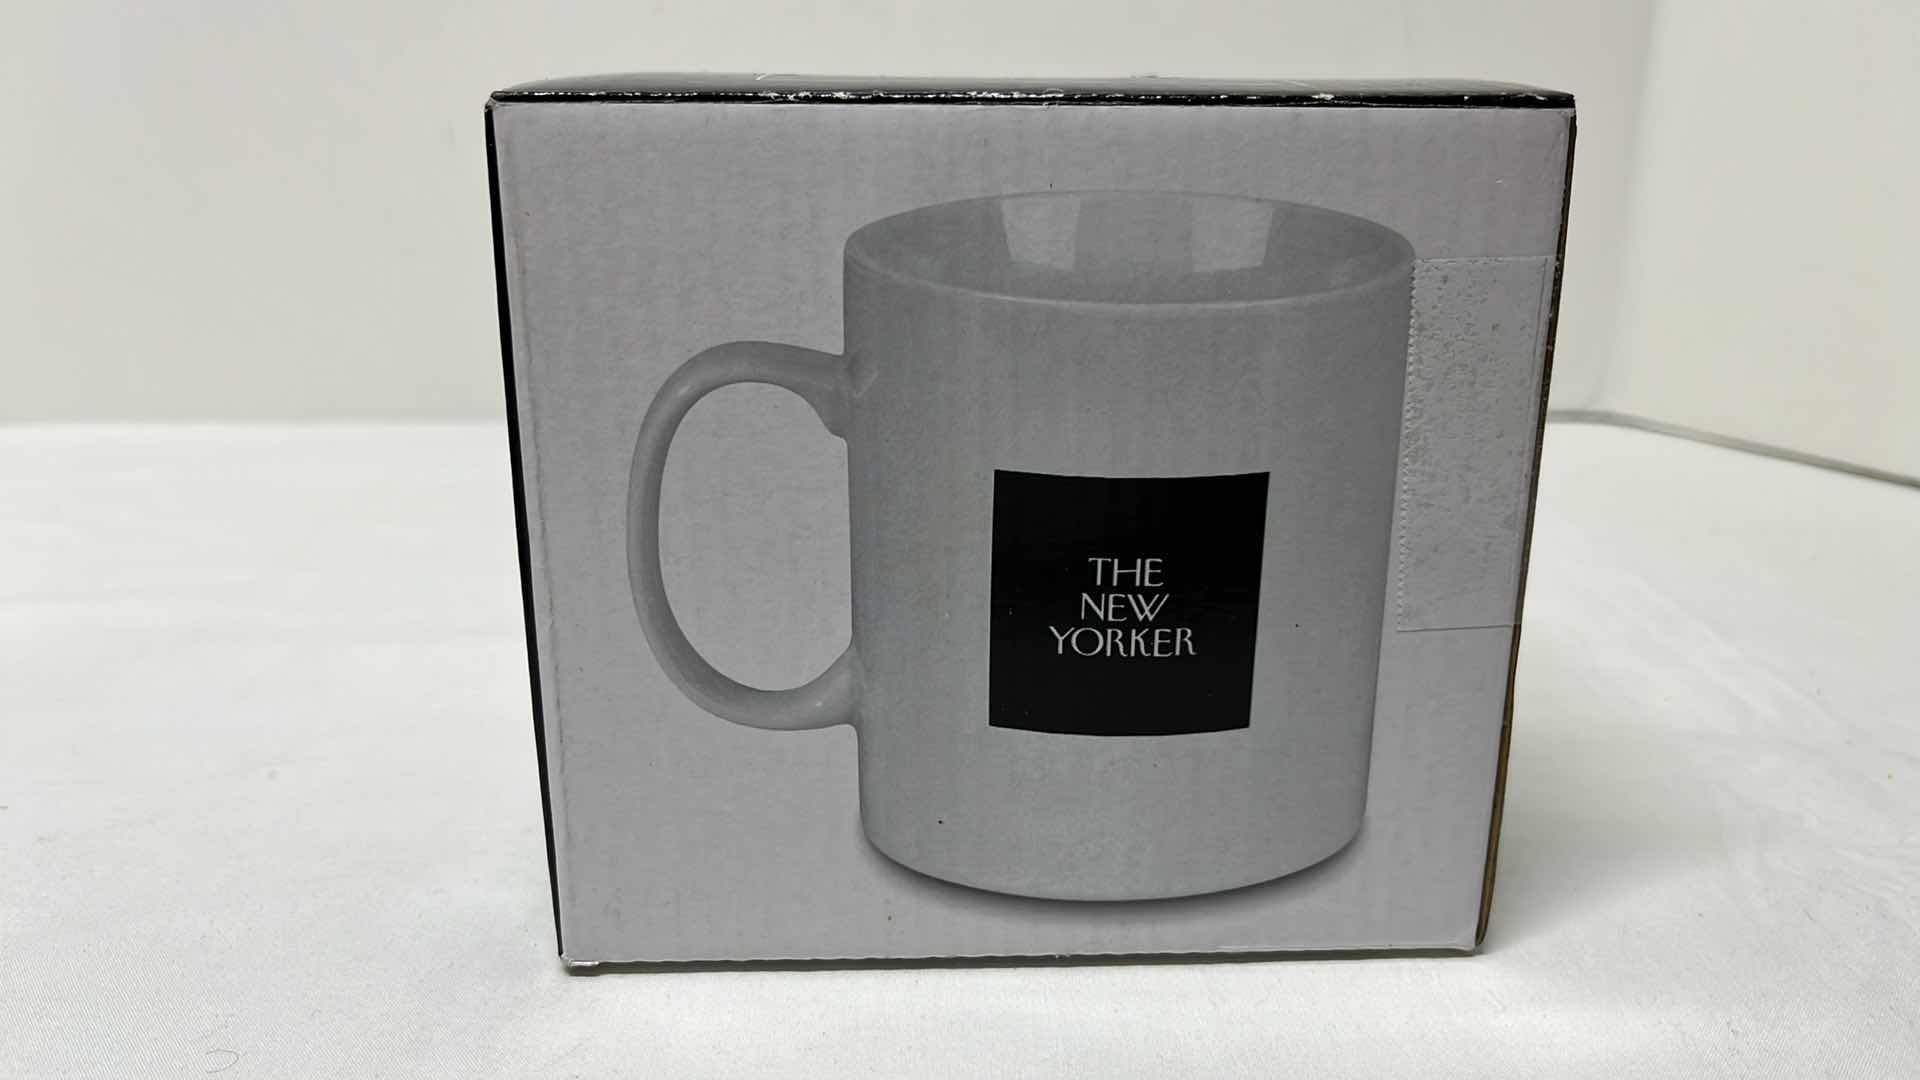 Photo 5 of KEEP CUP 8 OZ REUSABLE BREW GLASS COFFEE CUP, THE NEW YORKER 15 OZ MUG & 10 CUP COFFEE POT